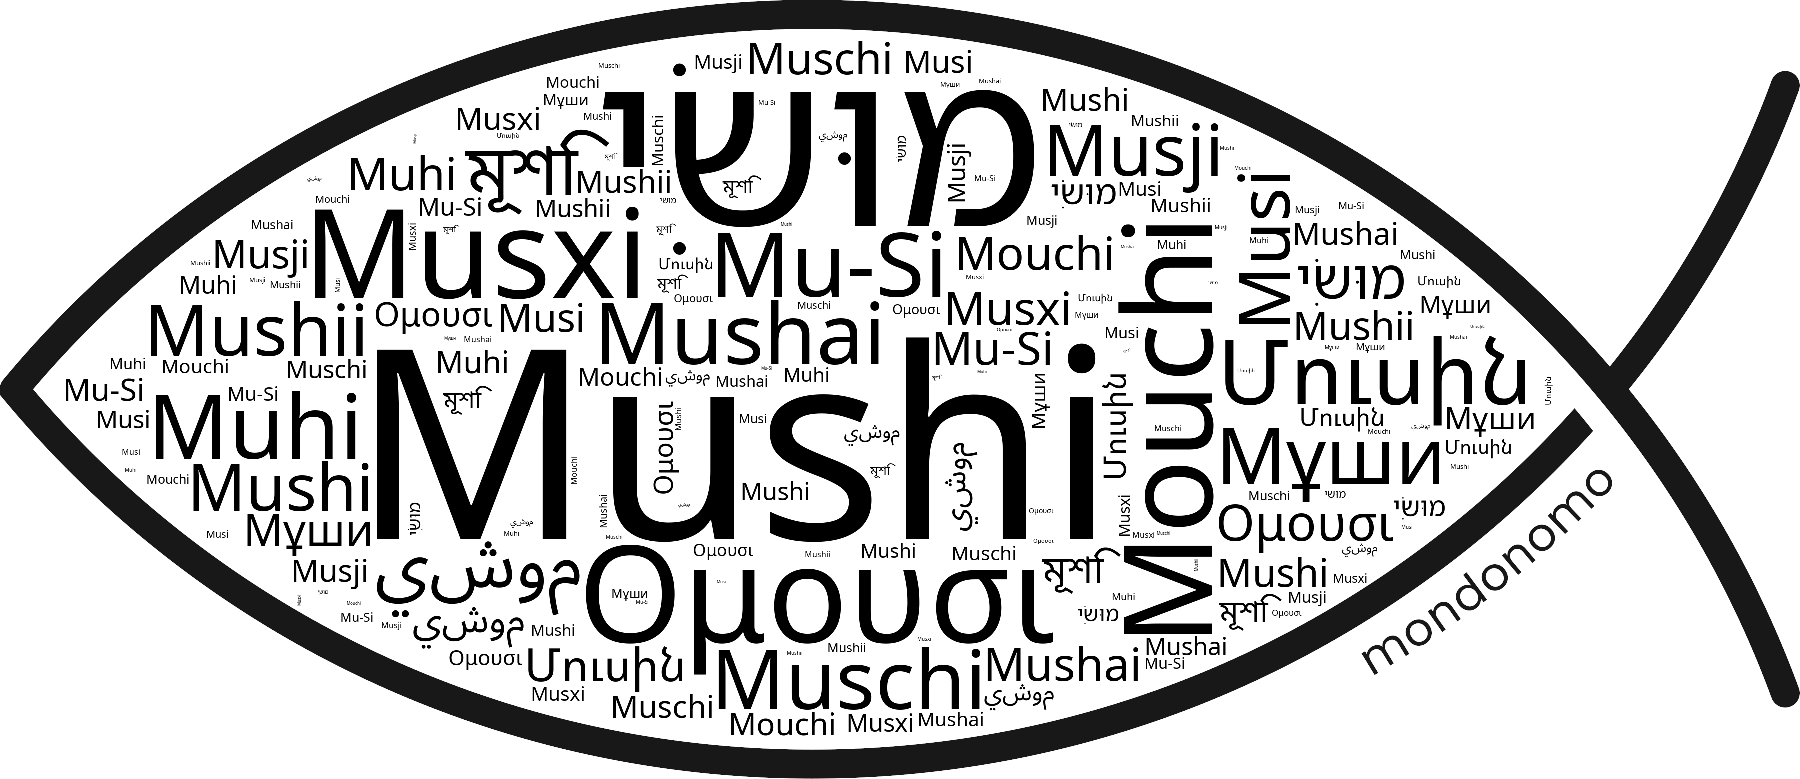 Name Mushi in the world's Bibles